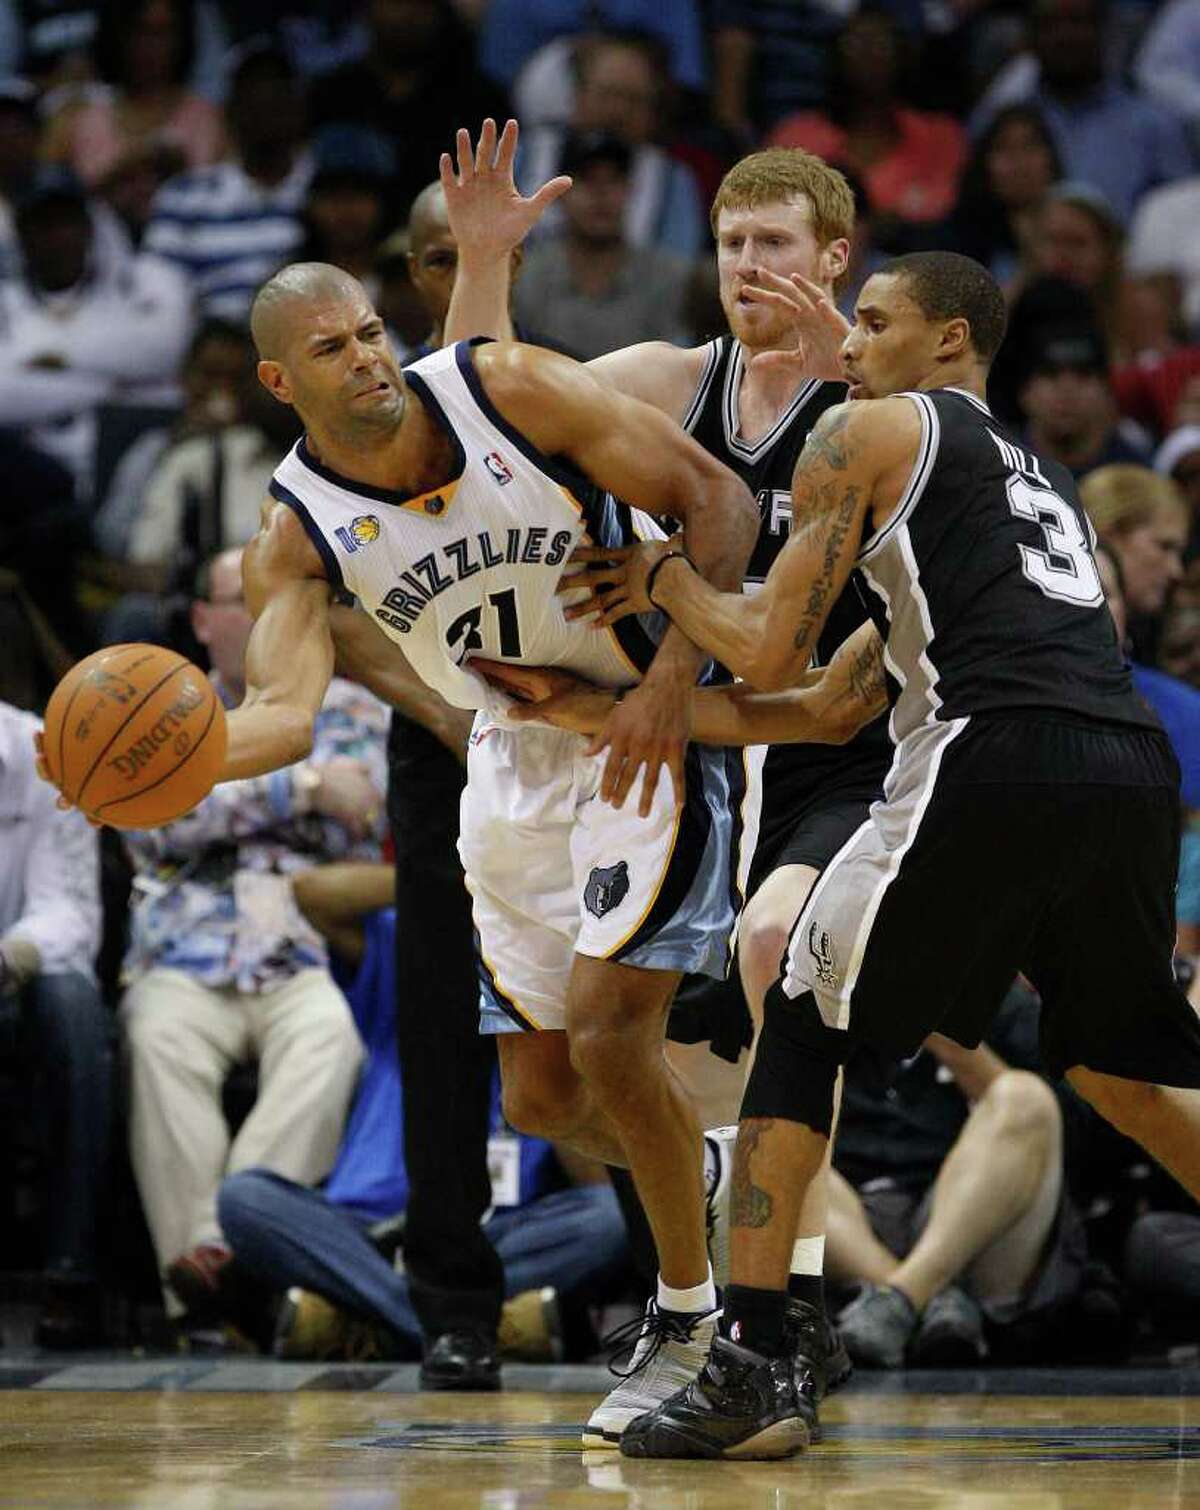 SPURS -- Memphis Grizzlies Shane Battier passes under pressure from San Antonio Spurs Matt Bonner and George Hill during the second half in the third game of the Western Conference Quarter First Round at FedExForum in Memphis, TN, April 23, 2011. The Grizzlies won 91-88 and go up 2-1 in the series. JERRY LARA/glara@express-news.net